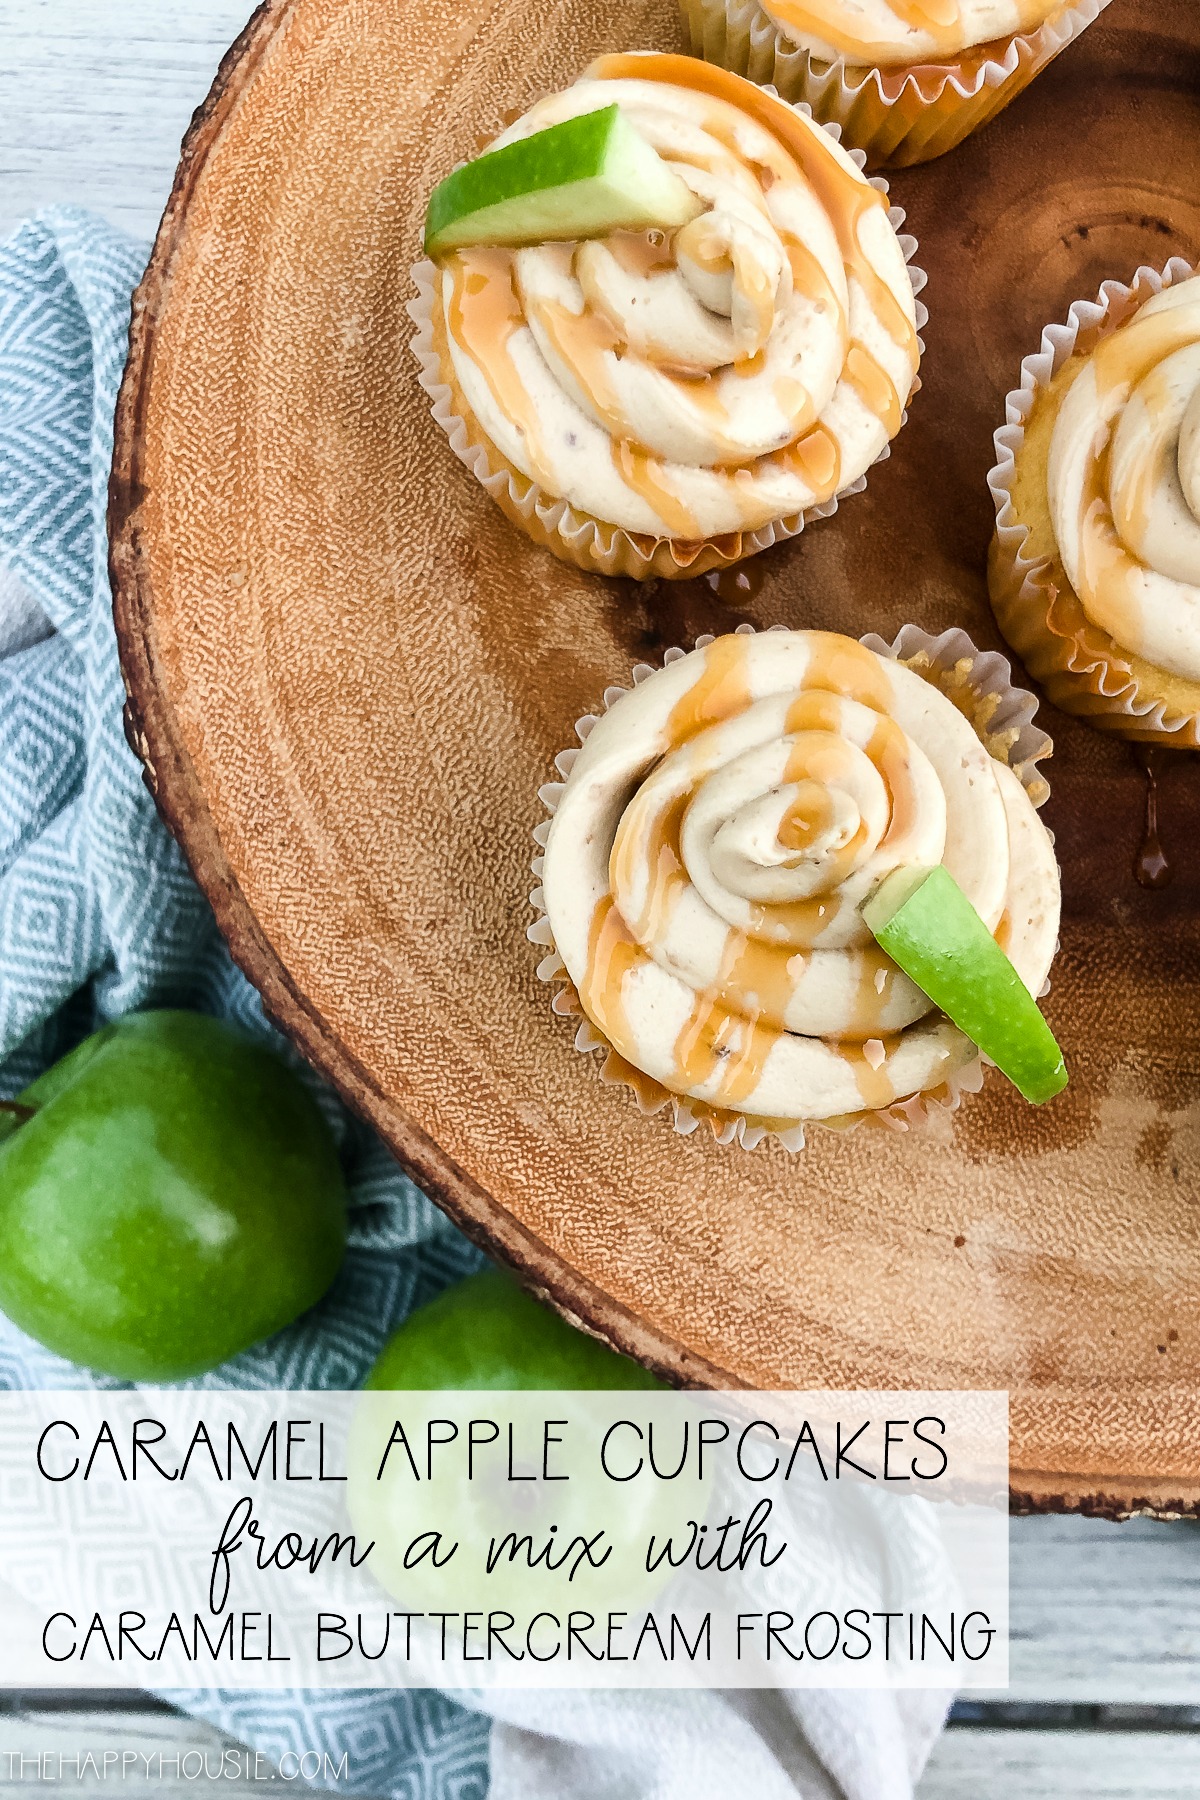 Caramel apple cupcakes from a mix with caramel buttercream frosting graphic.